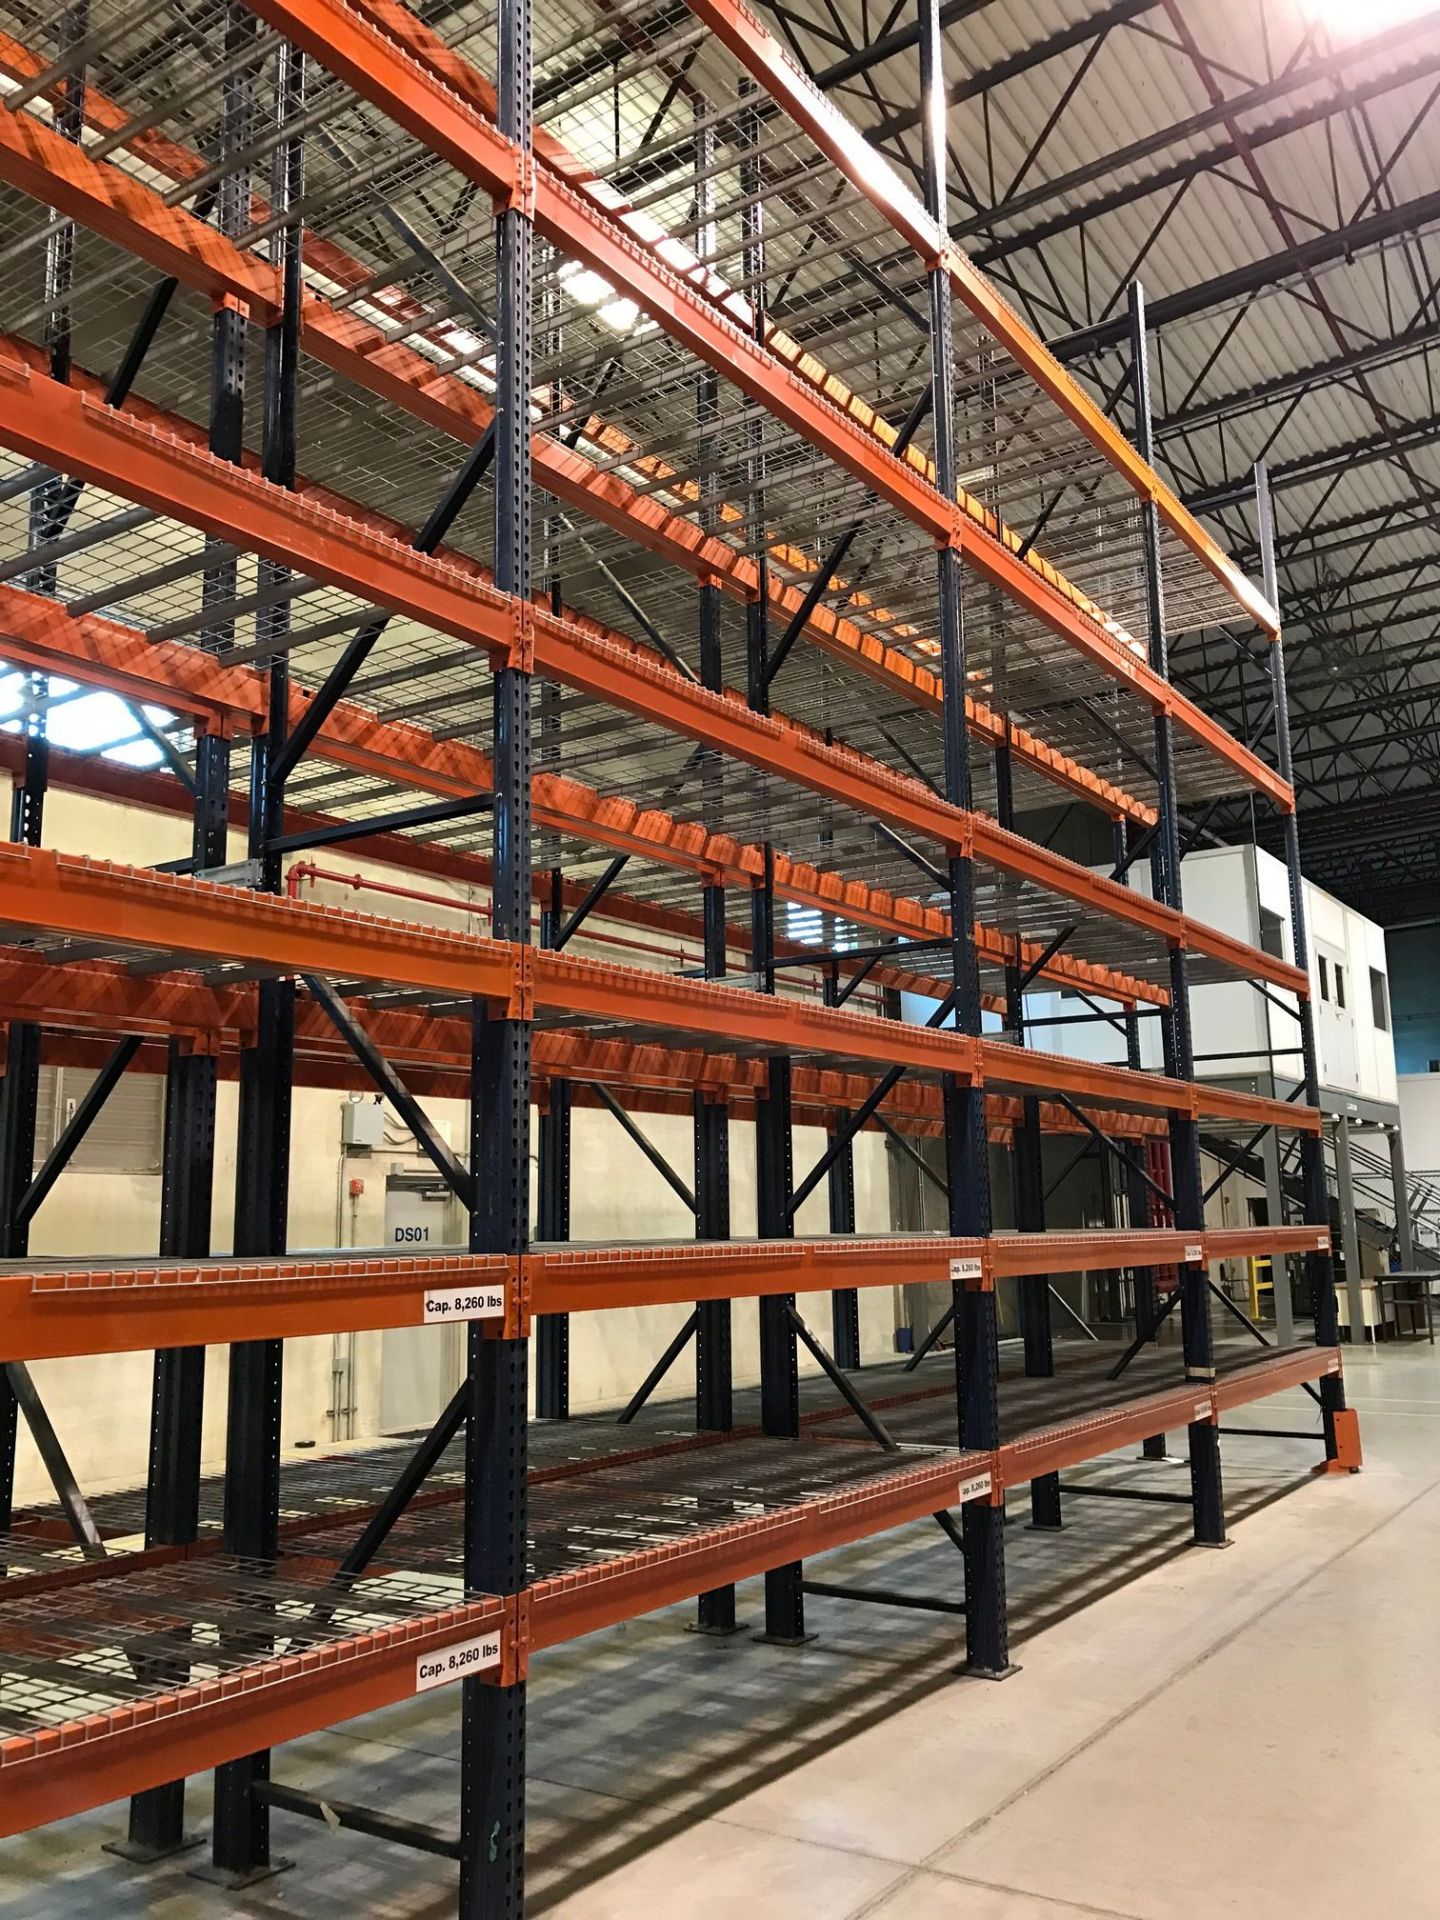 SECTIONS 60" X 108" X 288" TEARDROP TYPE ADJUSTABLE BEAM PALLET RACK WITH WIRE DECKING, 6" HIGH - Image 14 of 16